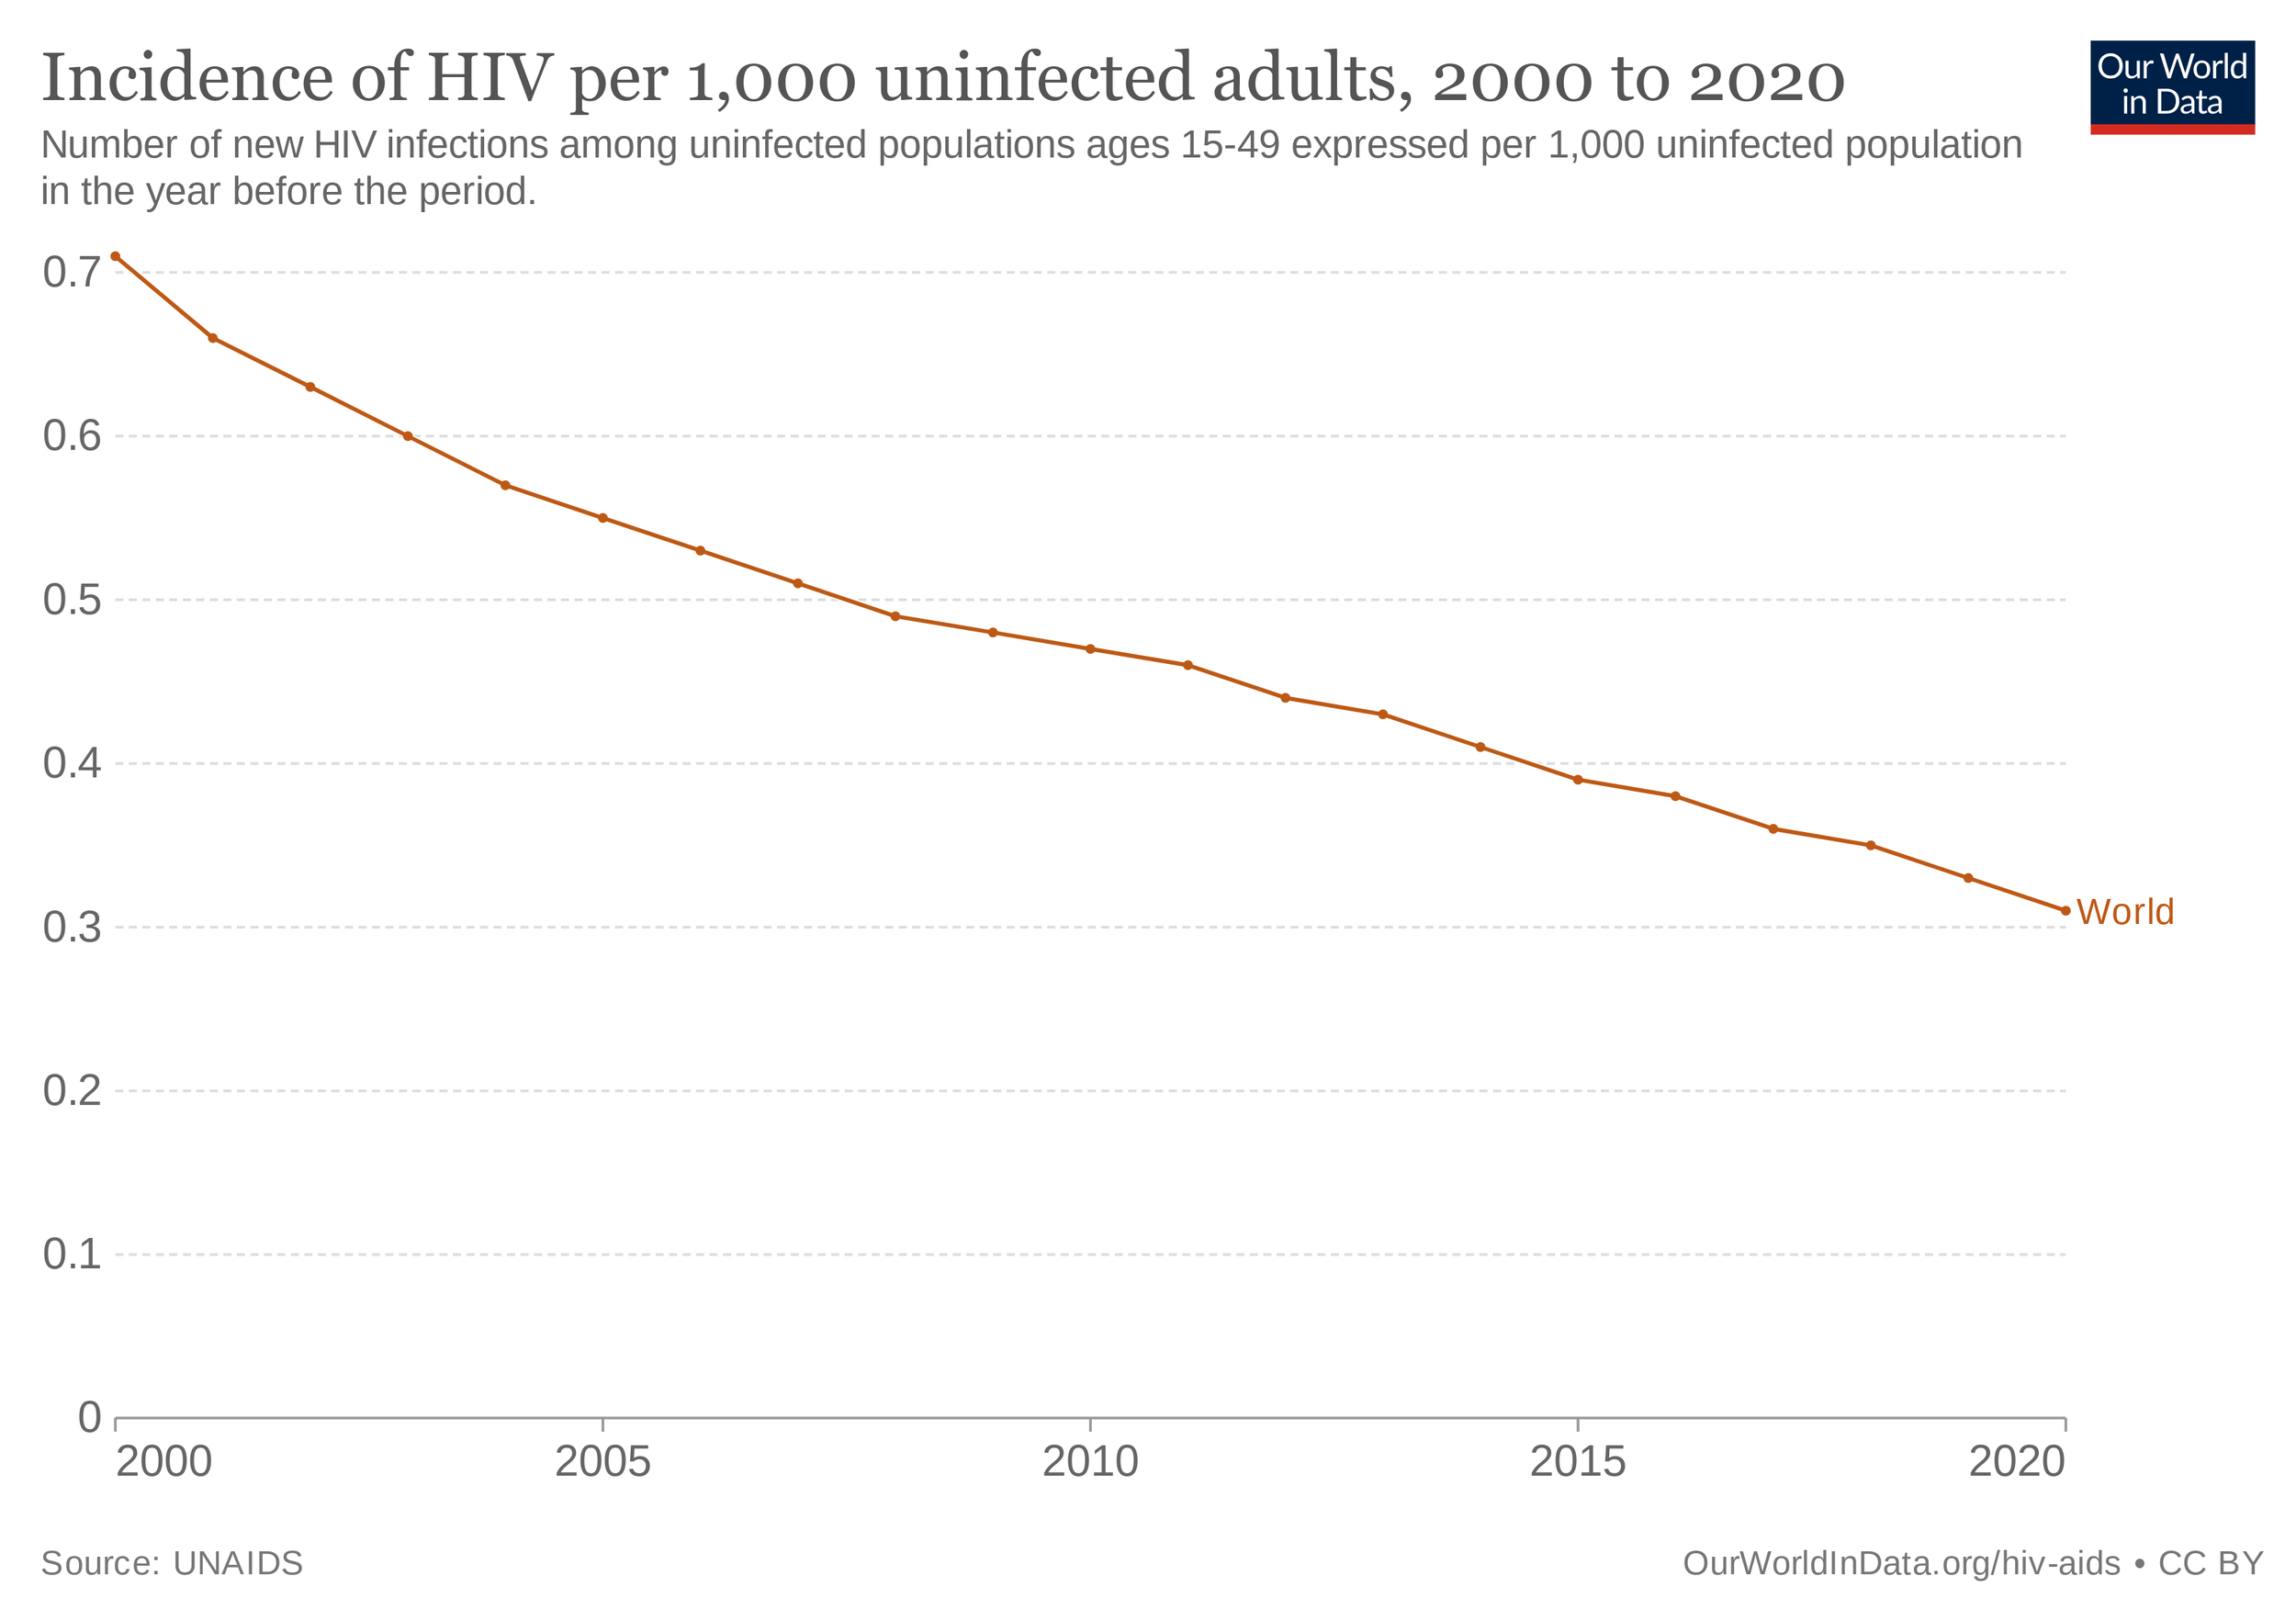 incidence-of-hiv-sdgs (1).png